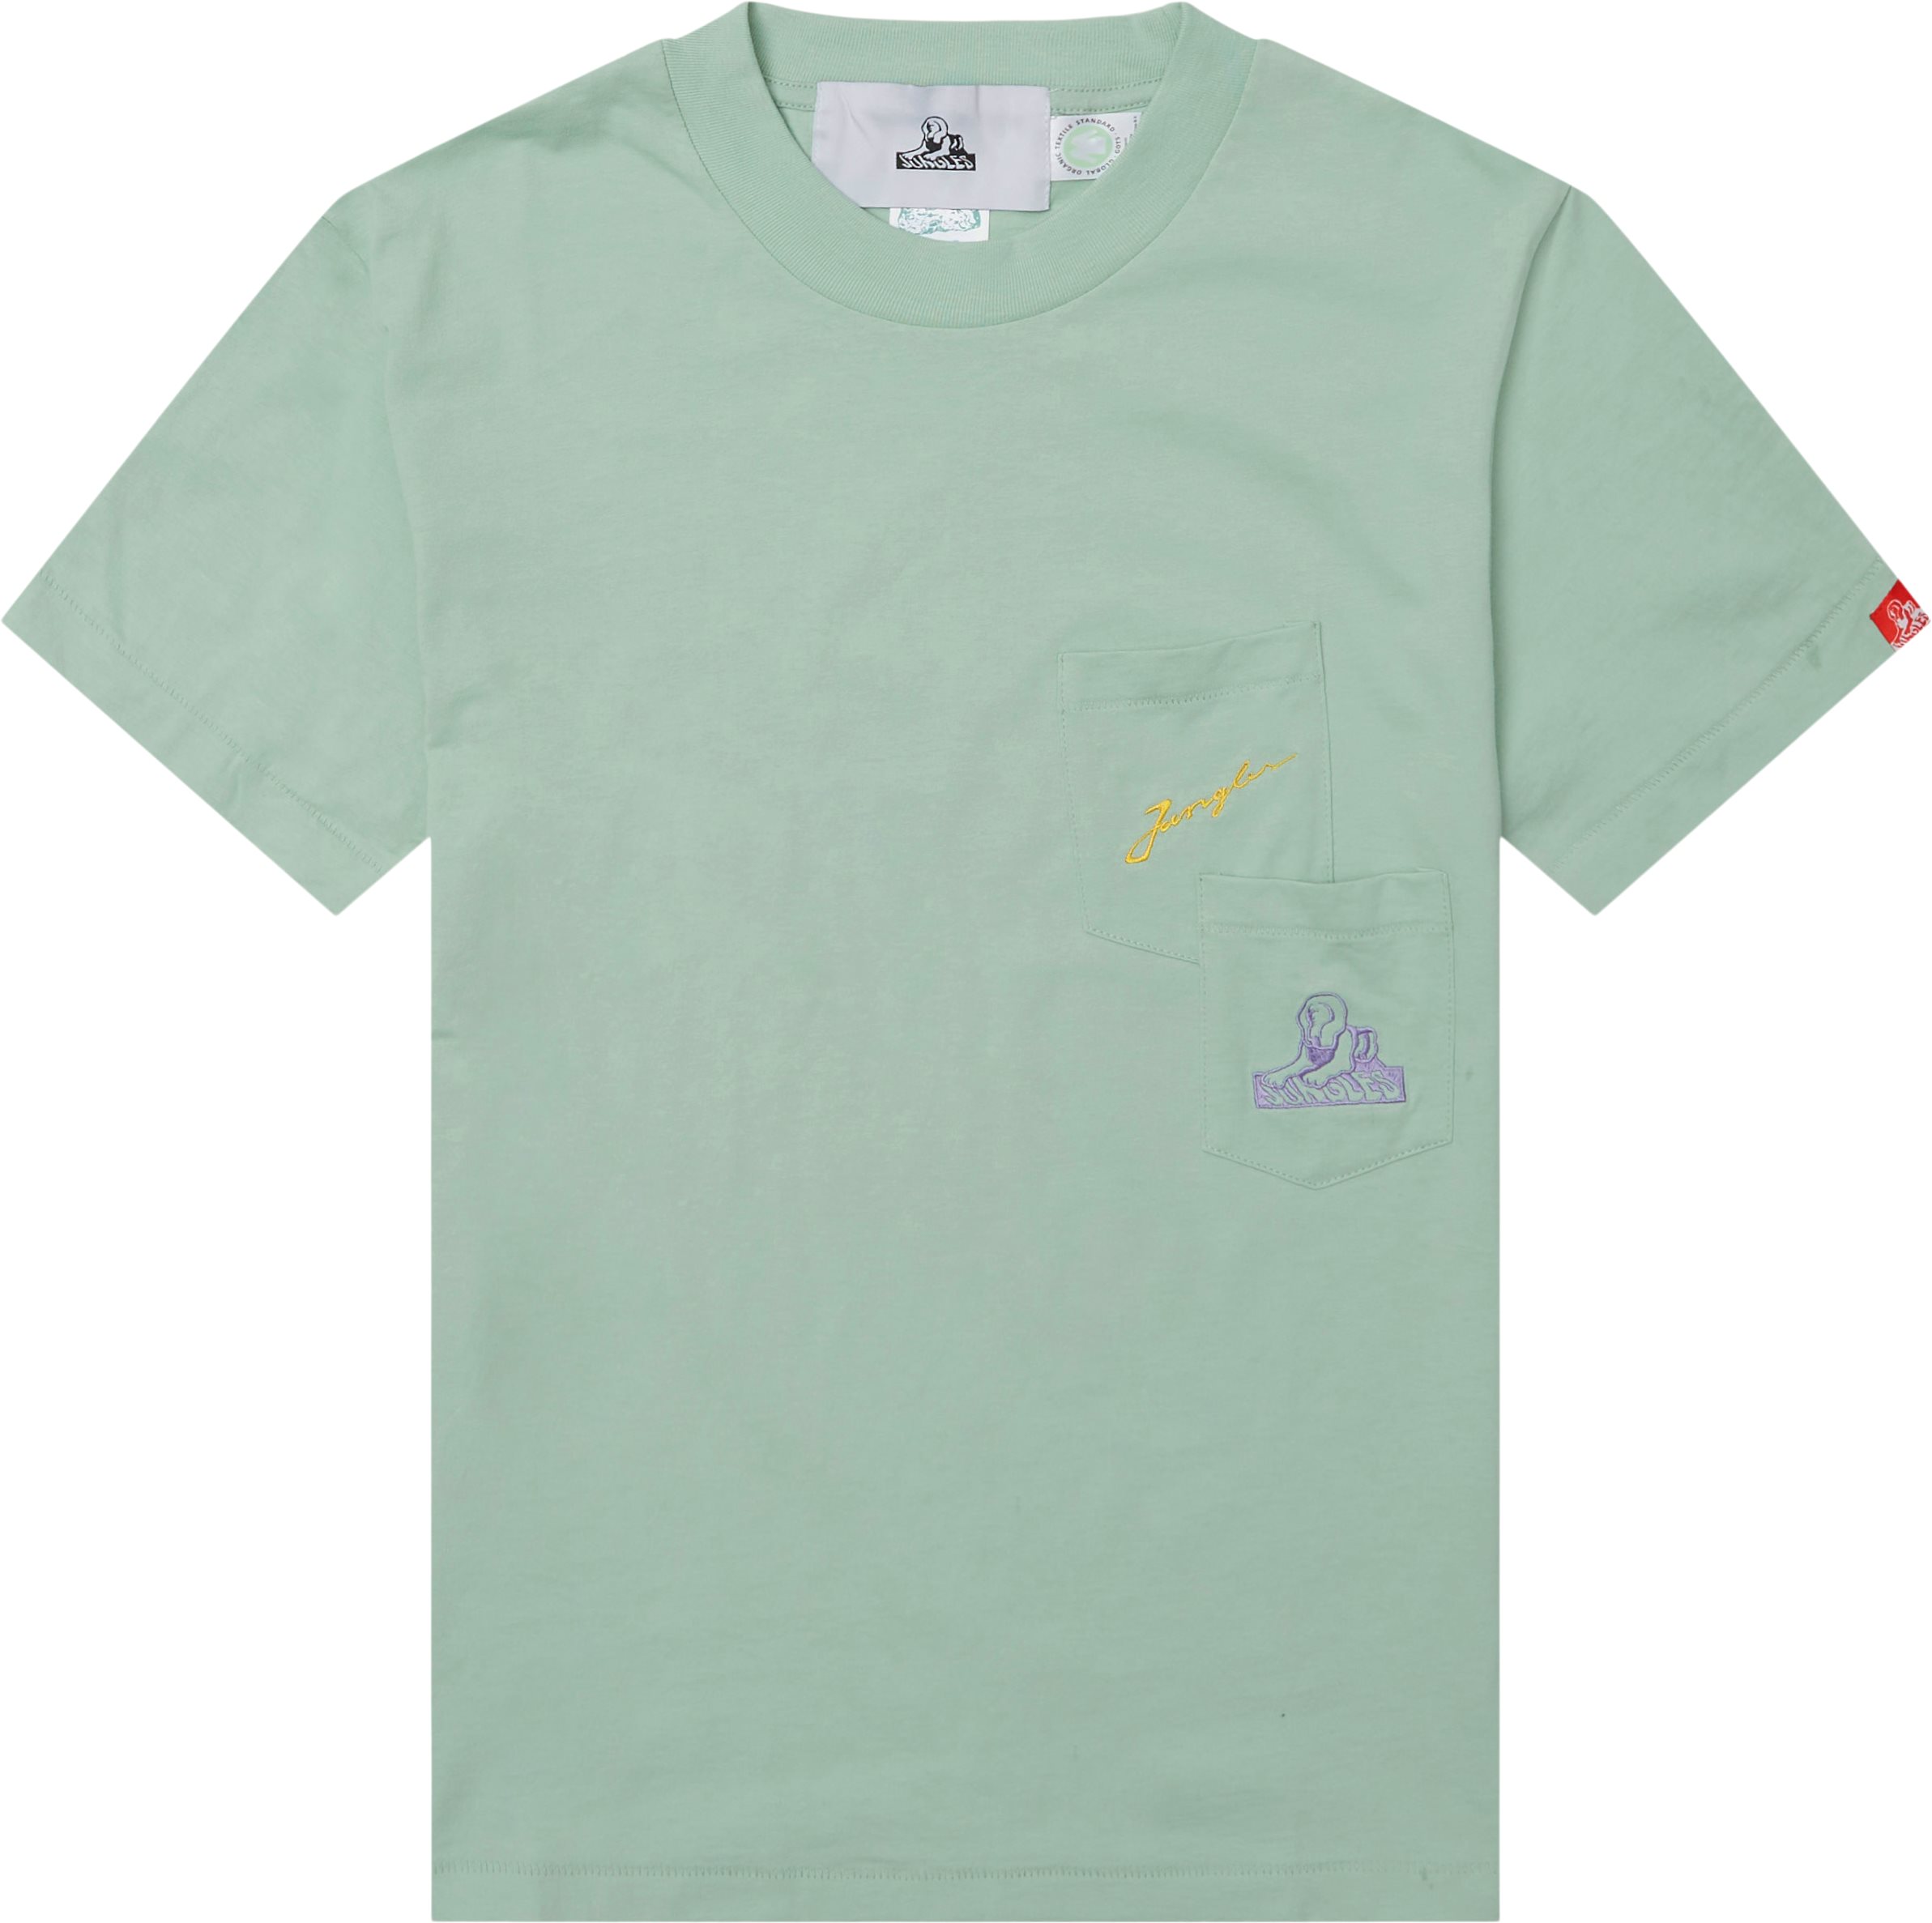 Signature Double Pocket Tee - T-shirts - Regular fit - Turquoise